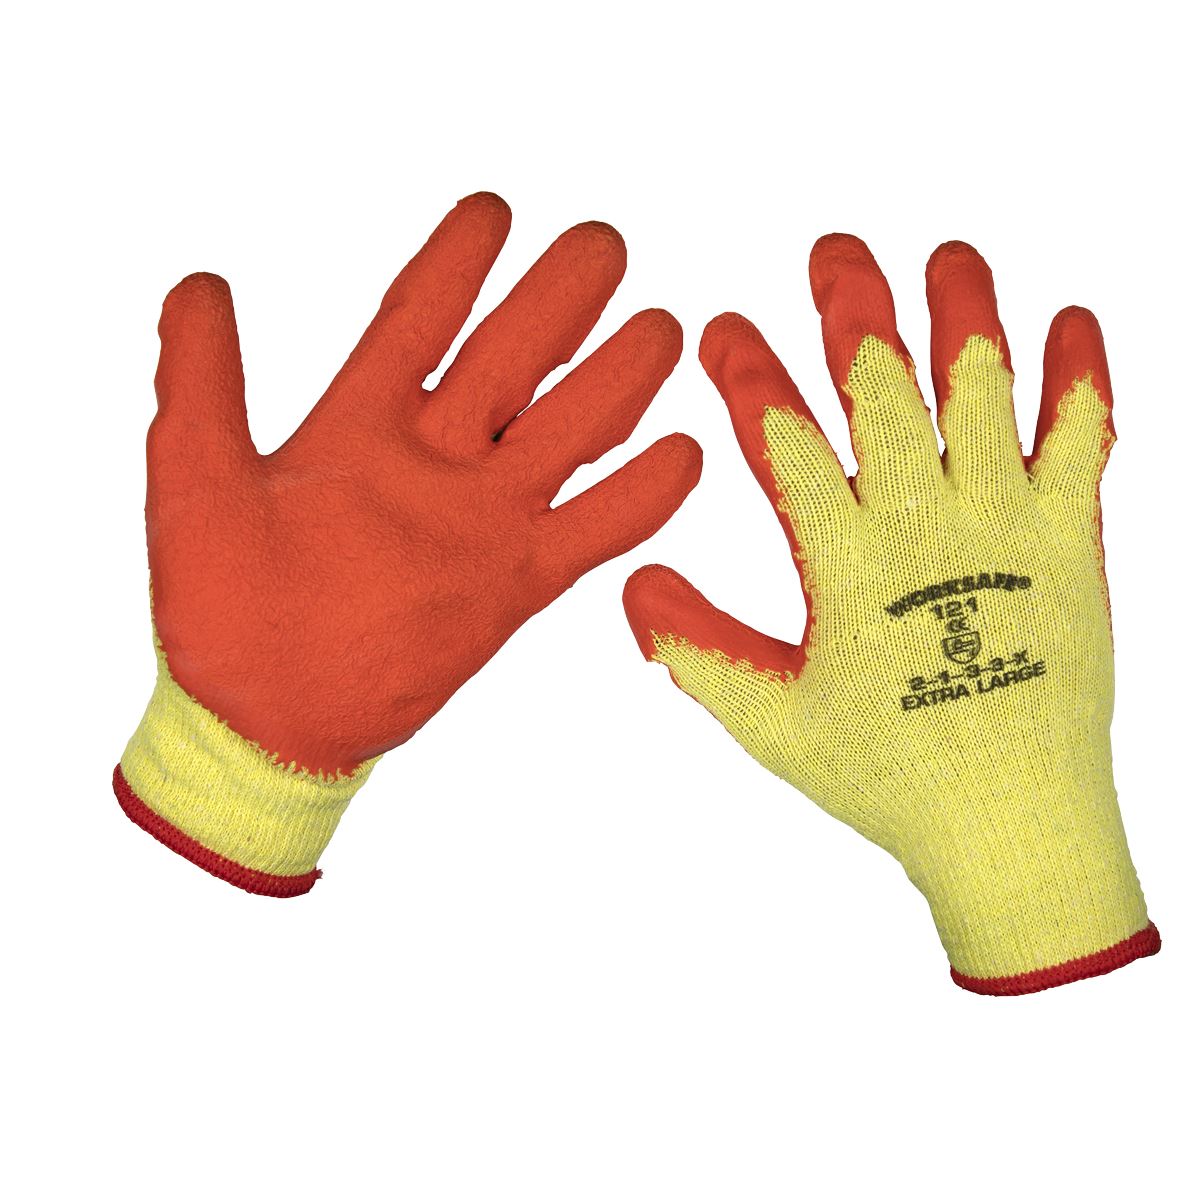 Worksafe by Sealey Super Grip Knitted Gloves Latex Palm (X-Large) - Pack of 12 Pairs